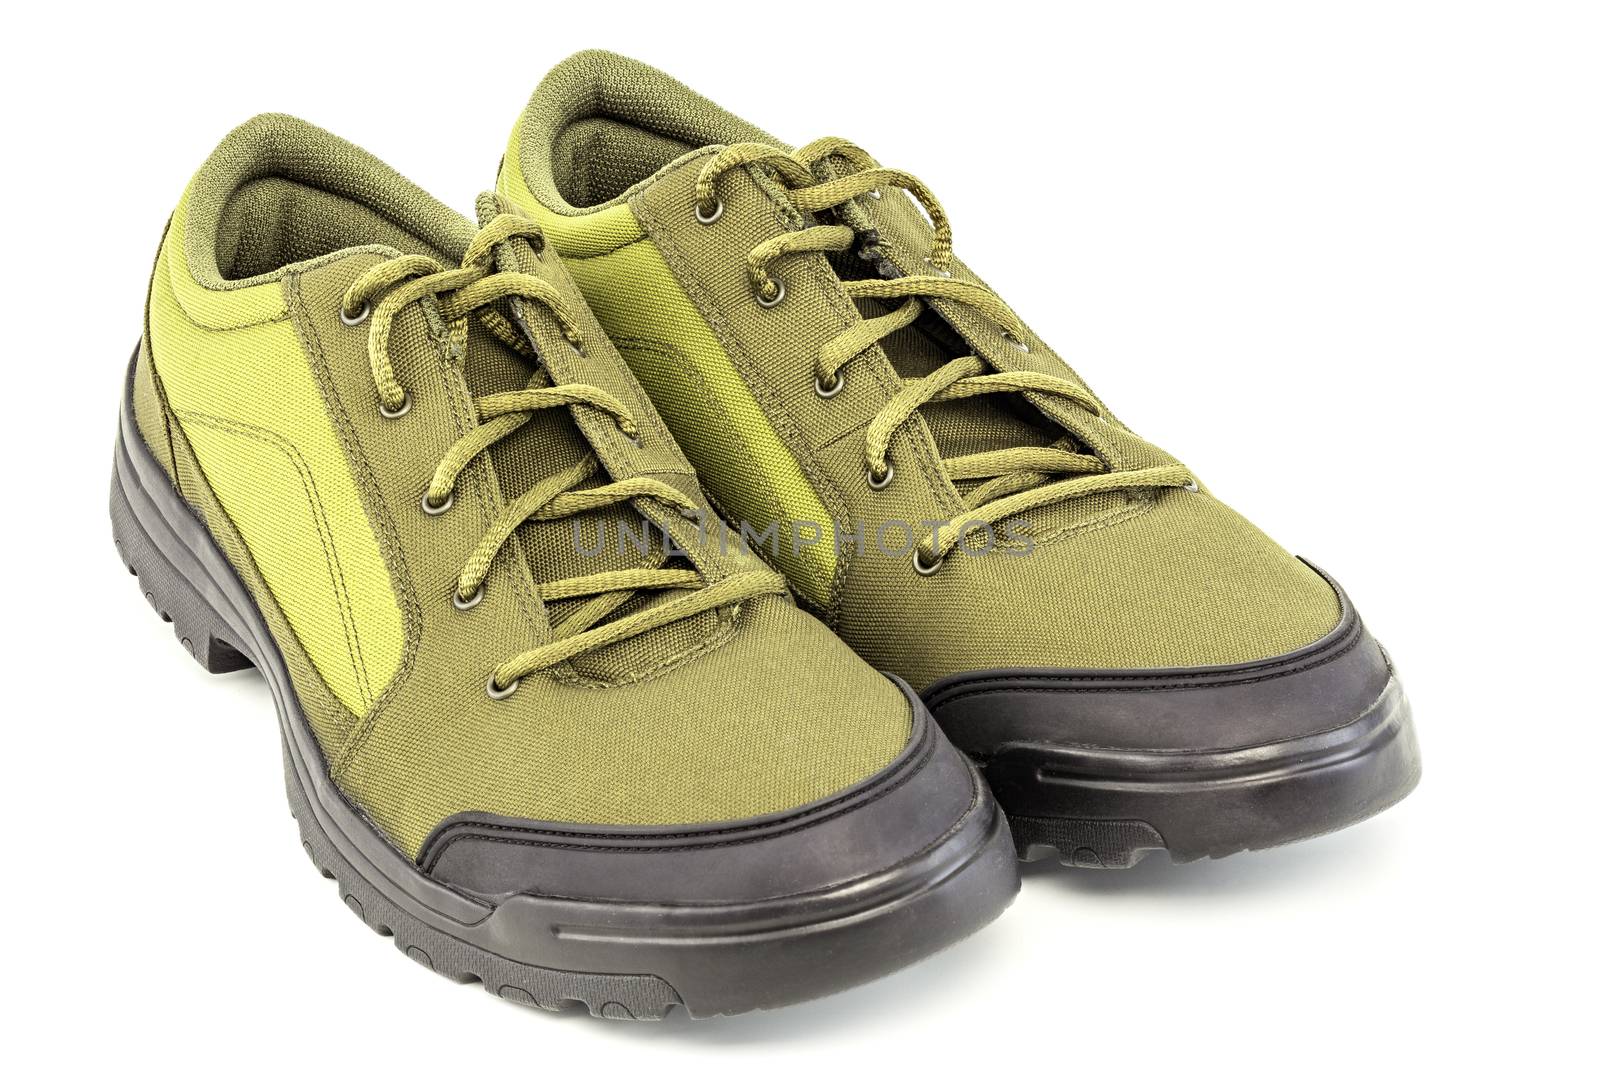 a pair of cheap yellow dense fabric fabric hiking or hunting shoe isolated on white background.